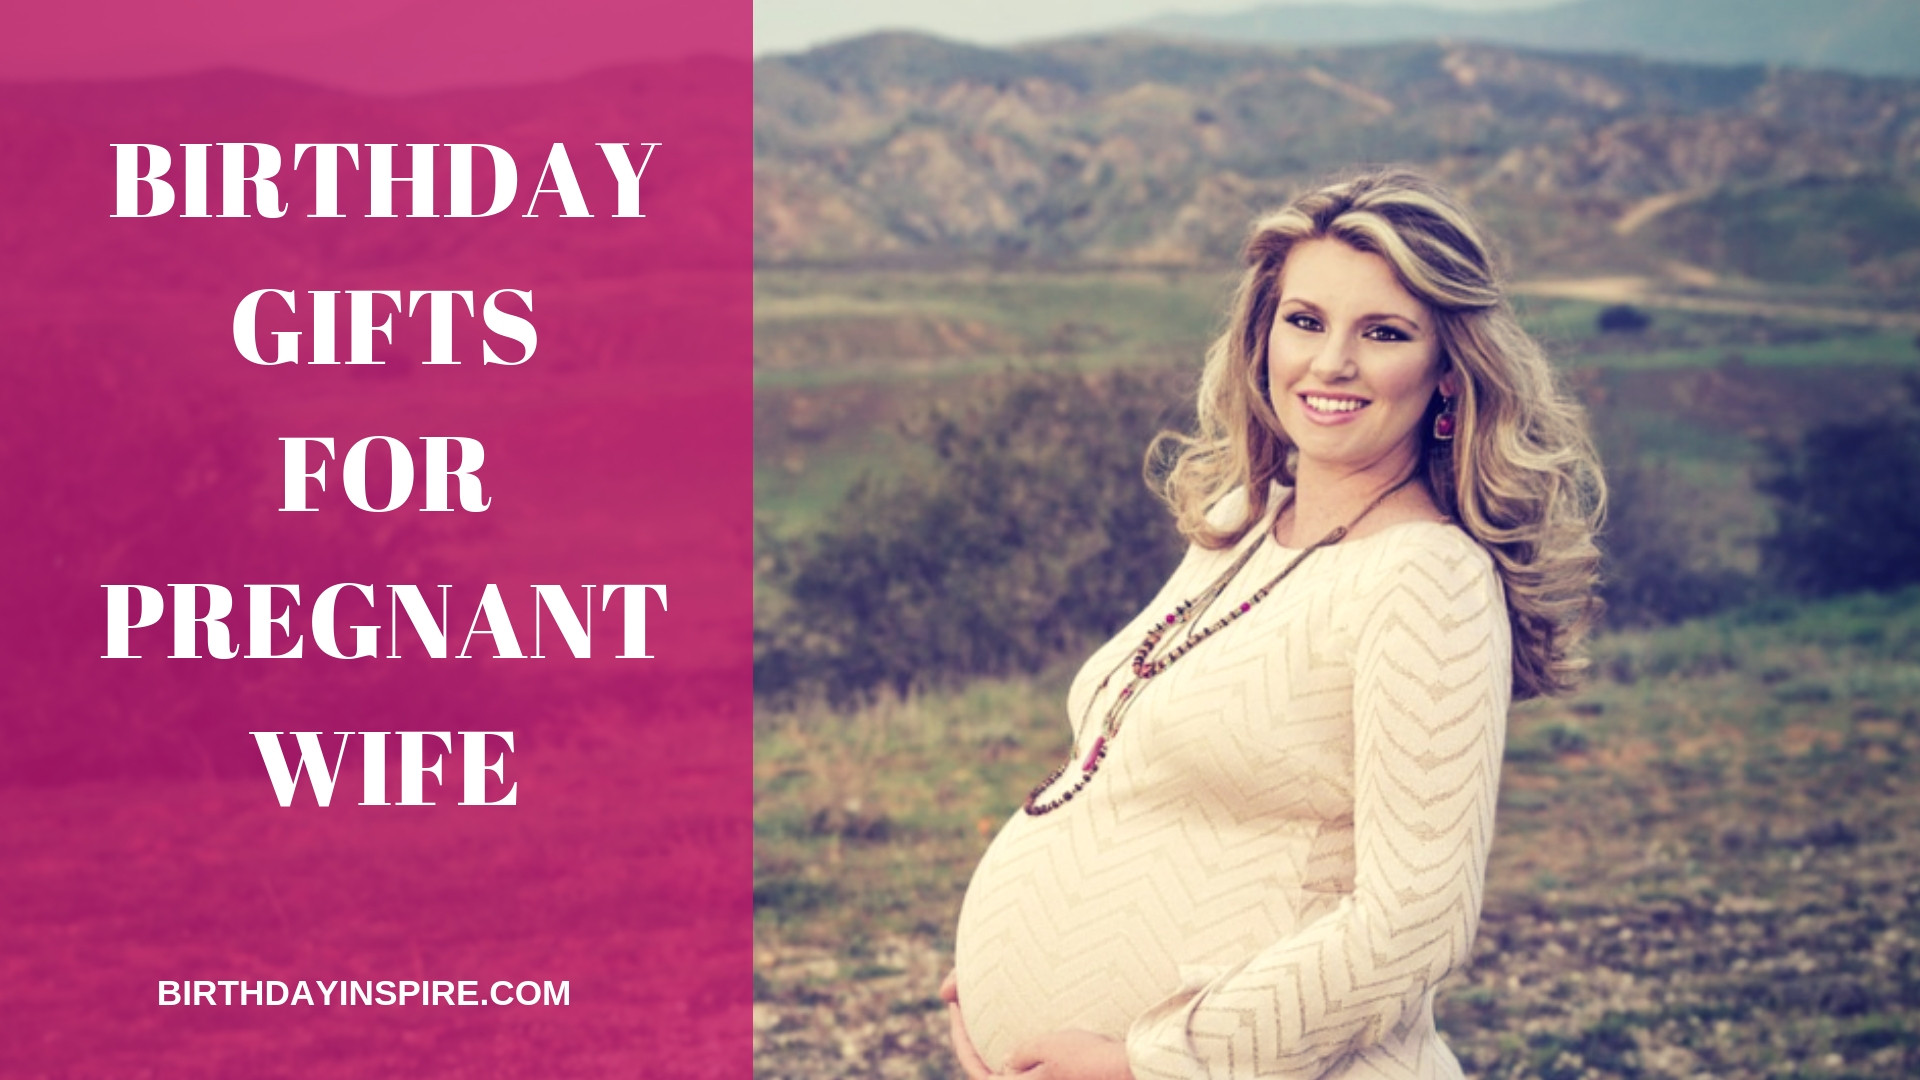 Valentines Gift Ideas For Pregnant Wife
 25 Useful Birthday Gifts For Pregnant Women